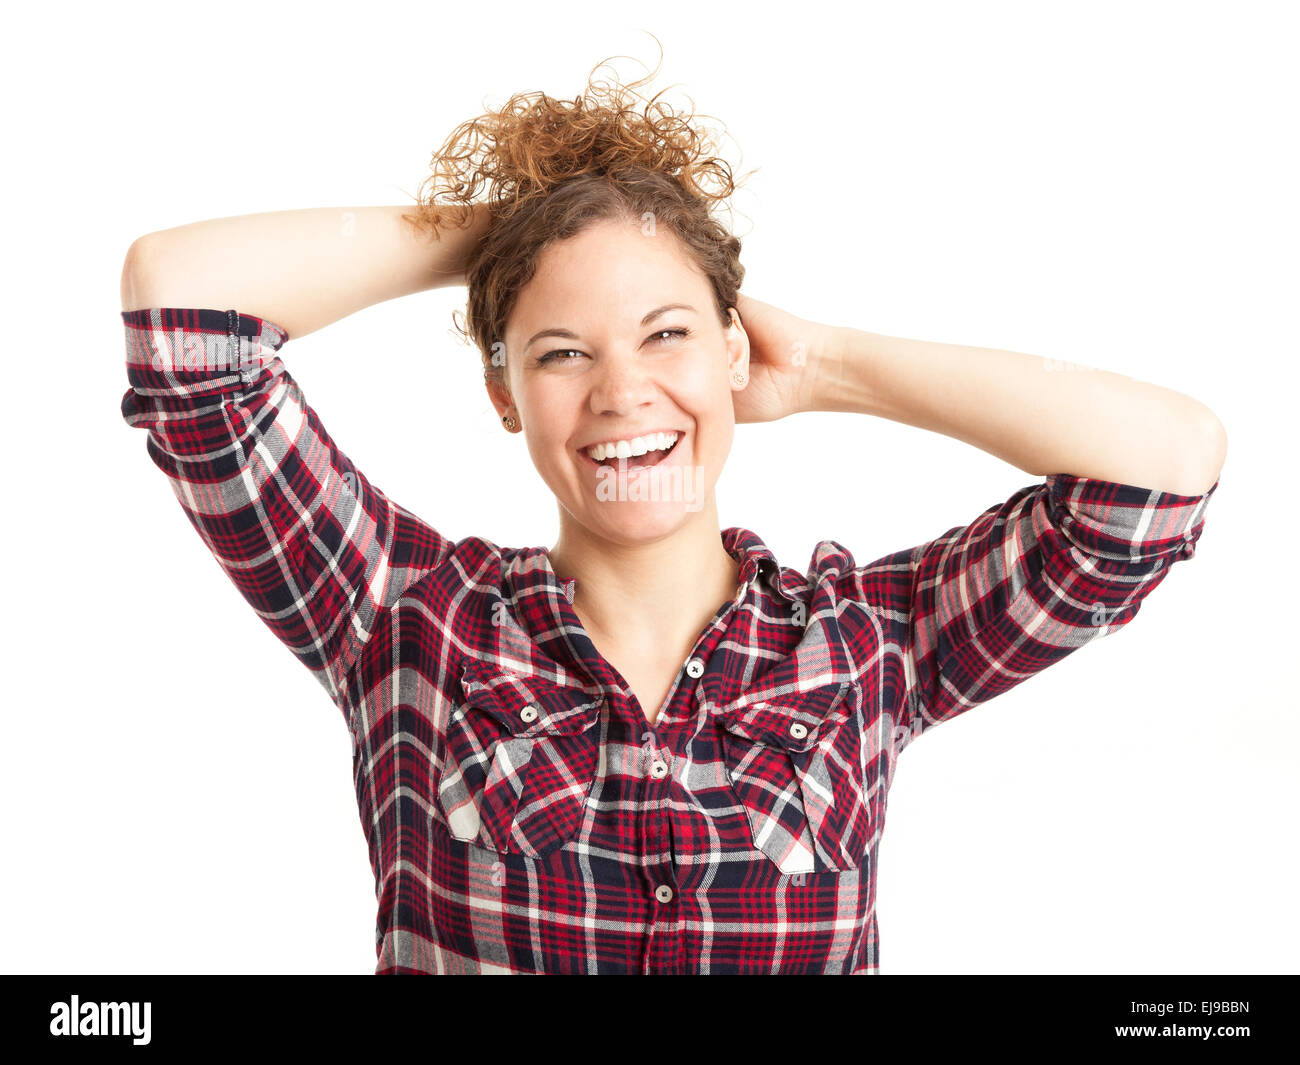 Young happy woman with curly hair Stock Photo